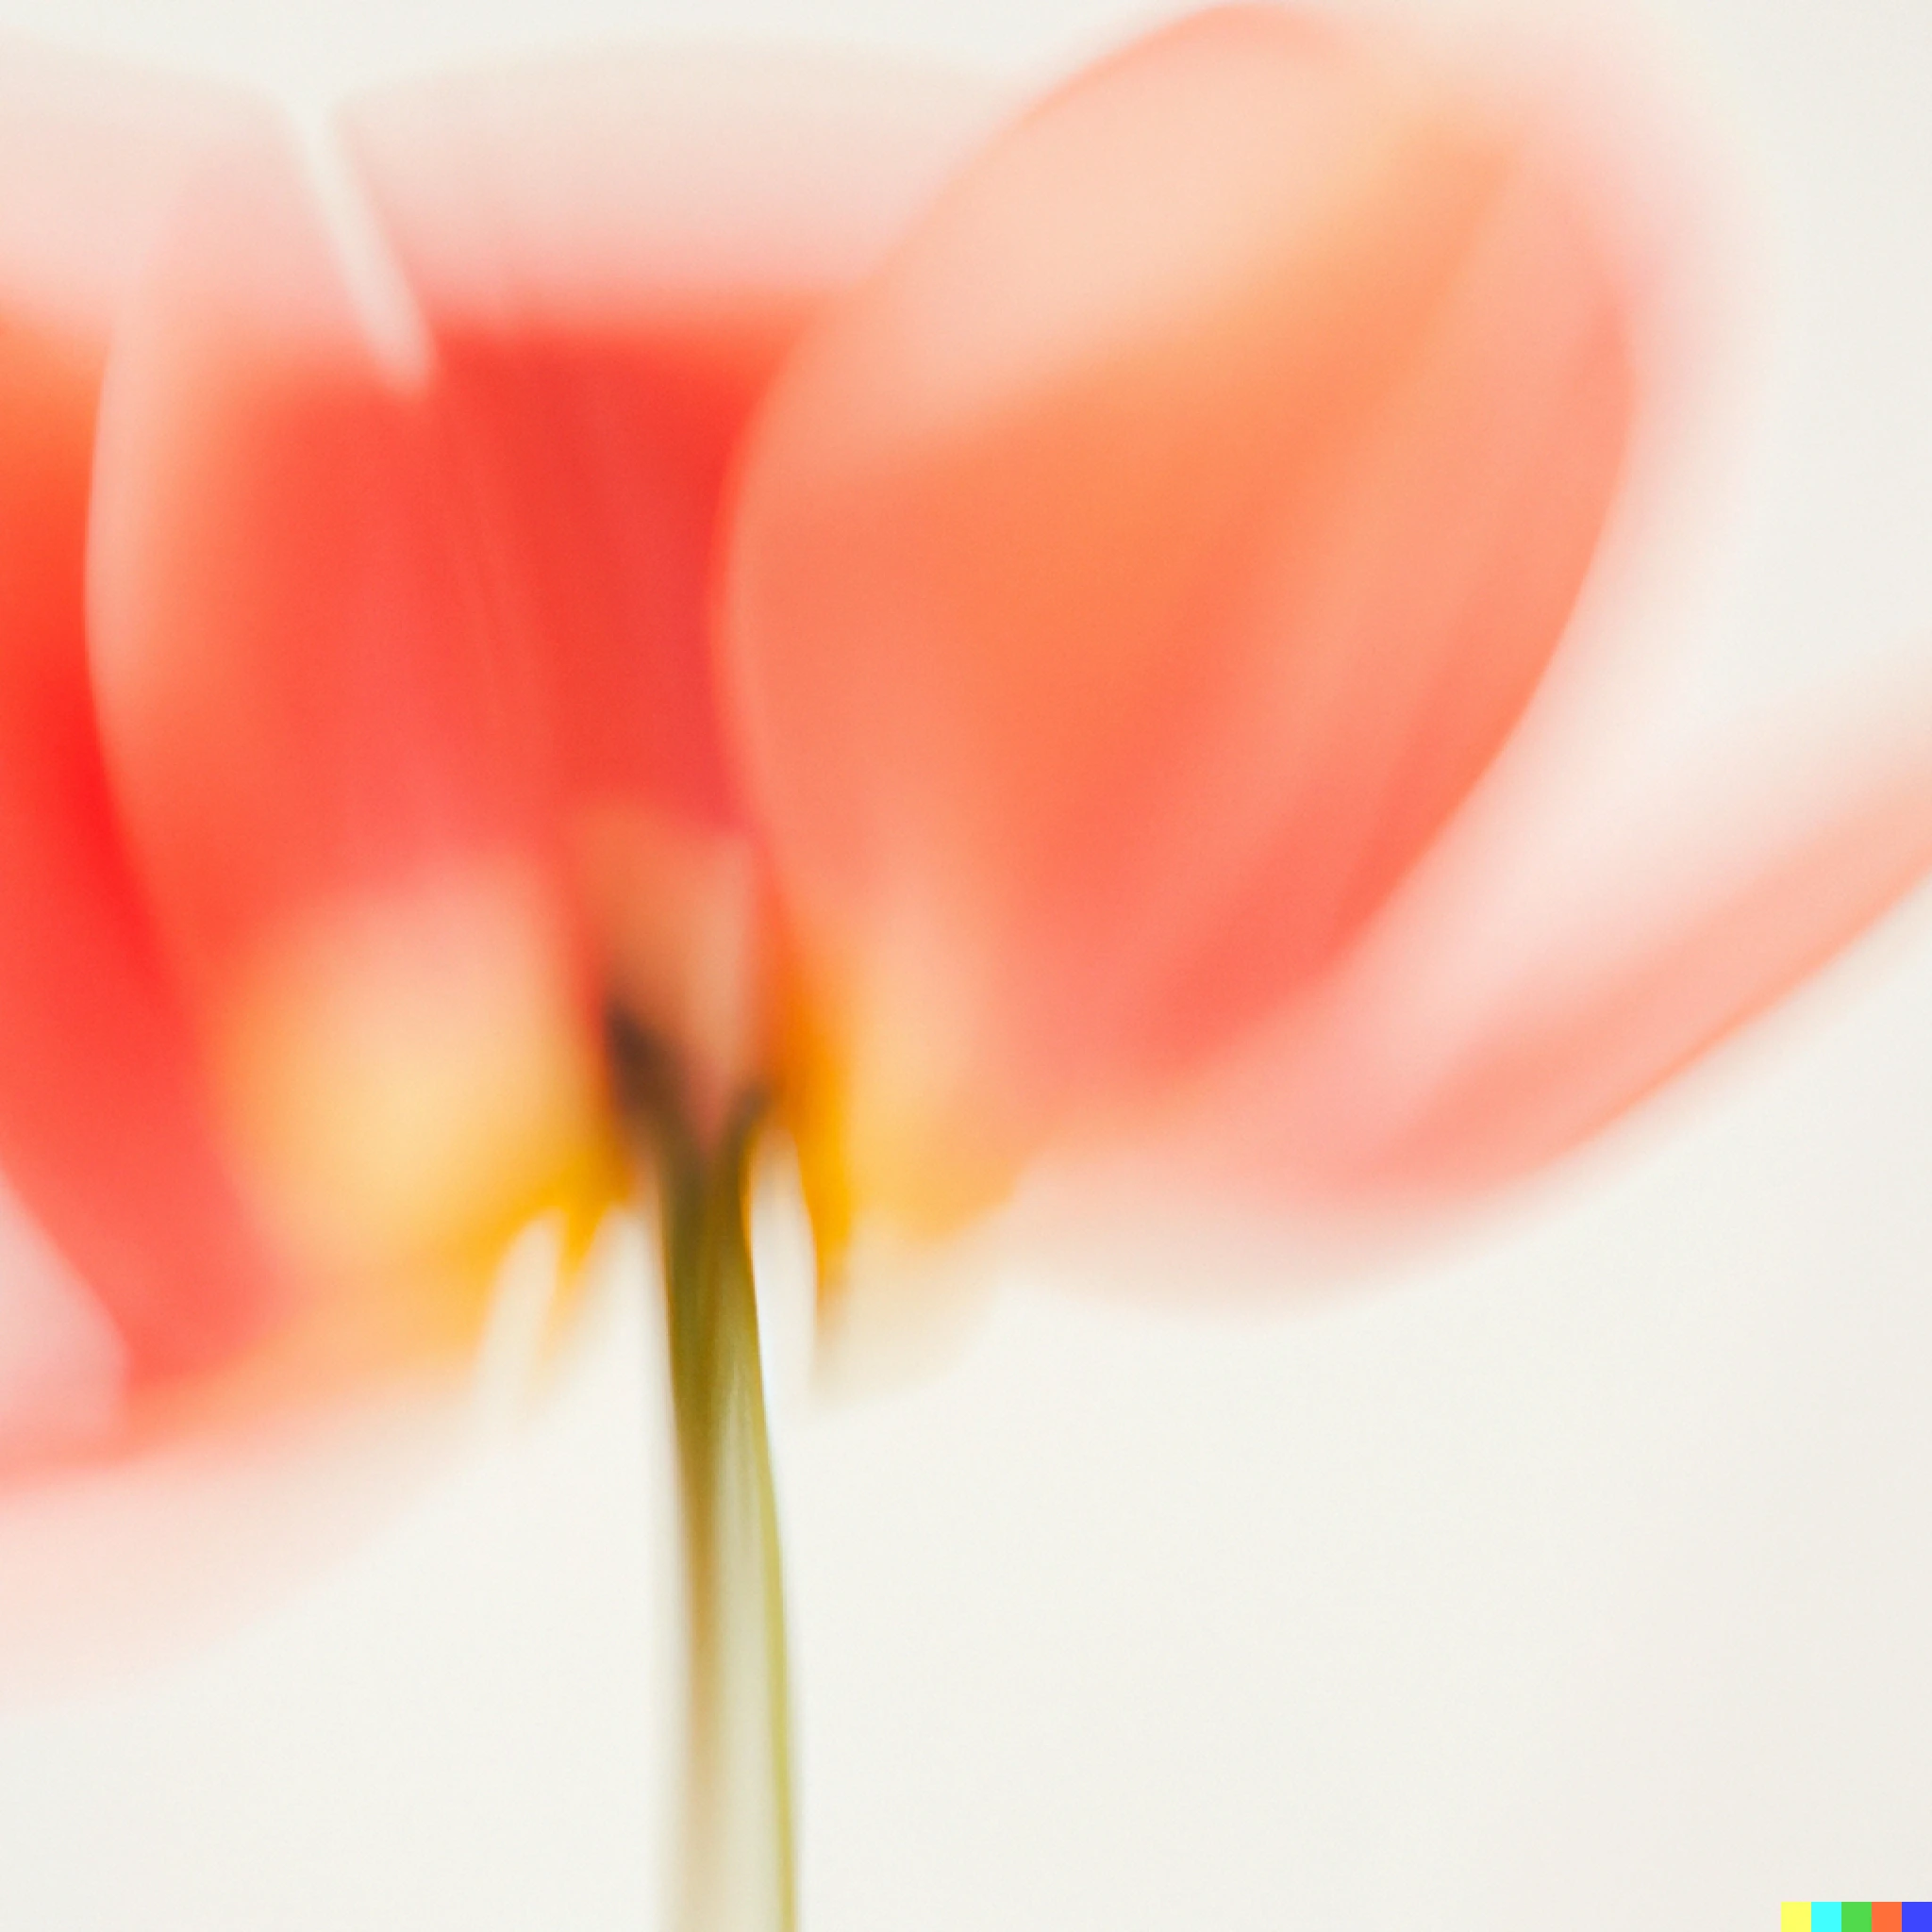 A textural blurred image of a red flower.